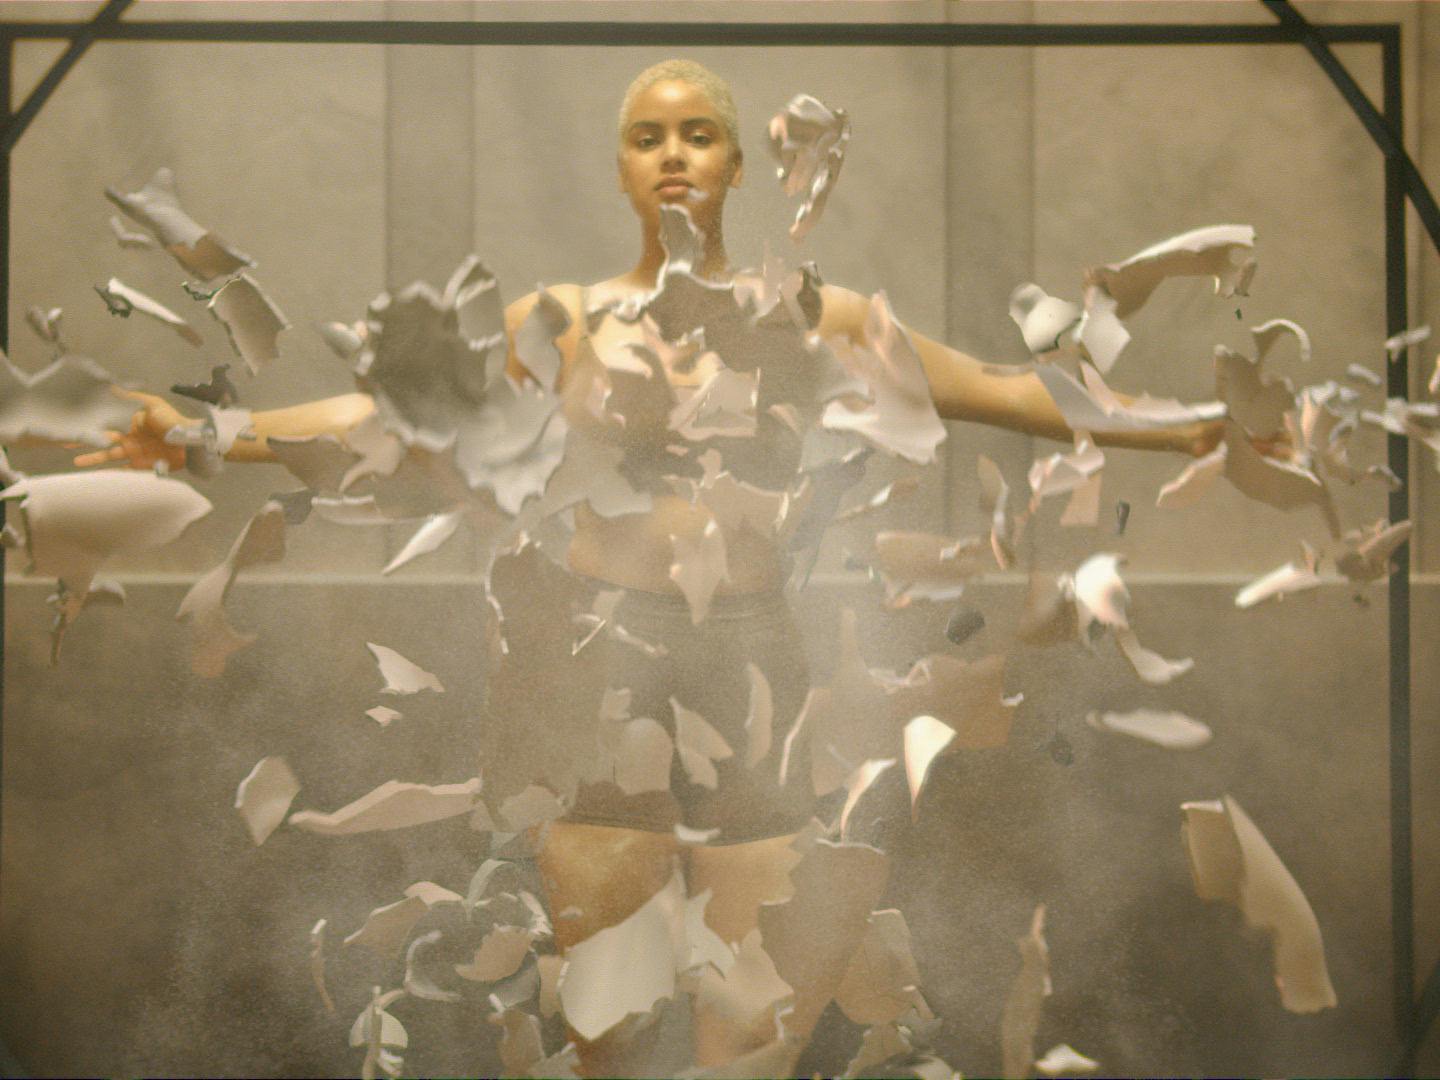 A woman with short hair looking powerful with arms outstretched while pieces of a broken mold representing a historically male centric health research paradigm float around her.